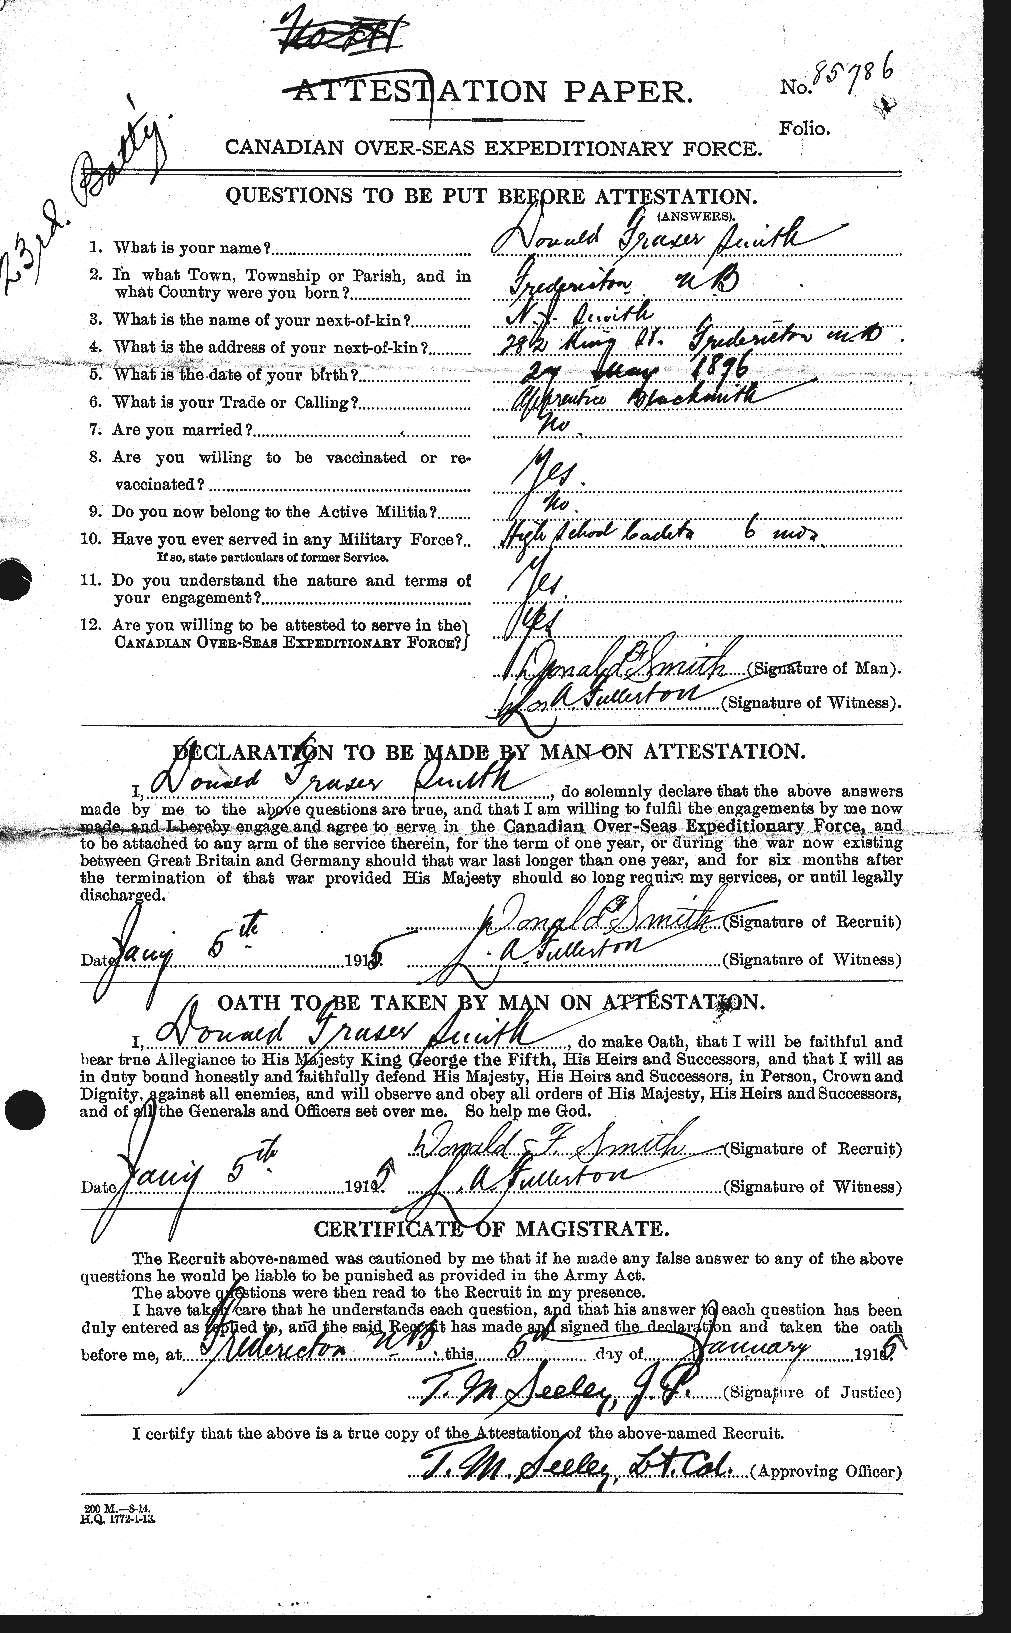 Personnel Records of the First World War - CEF 101784a